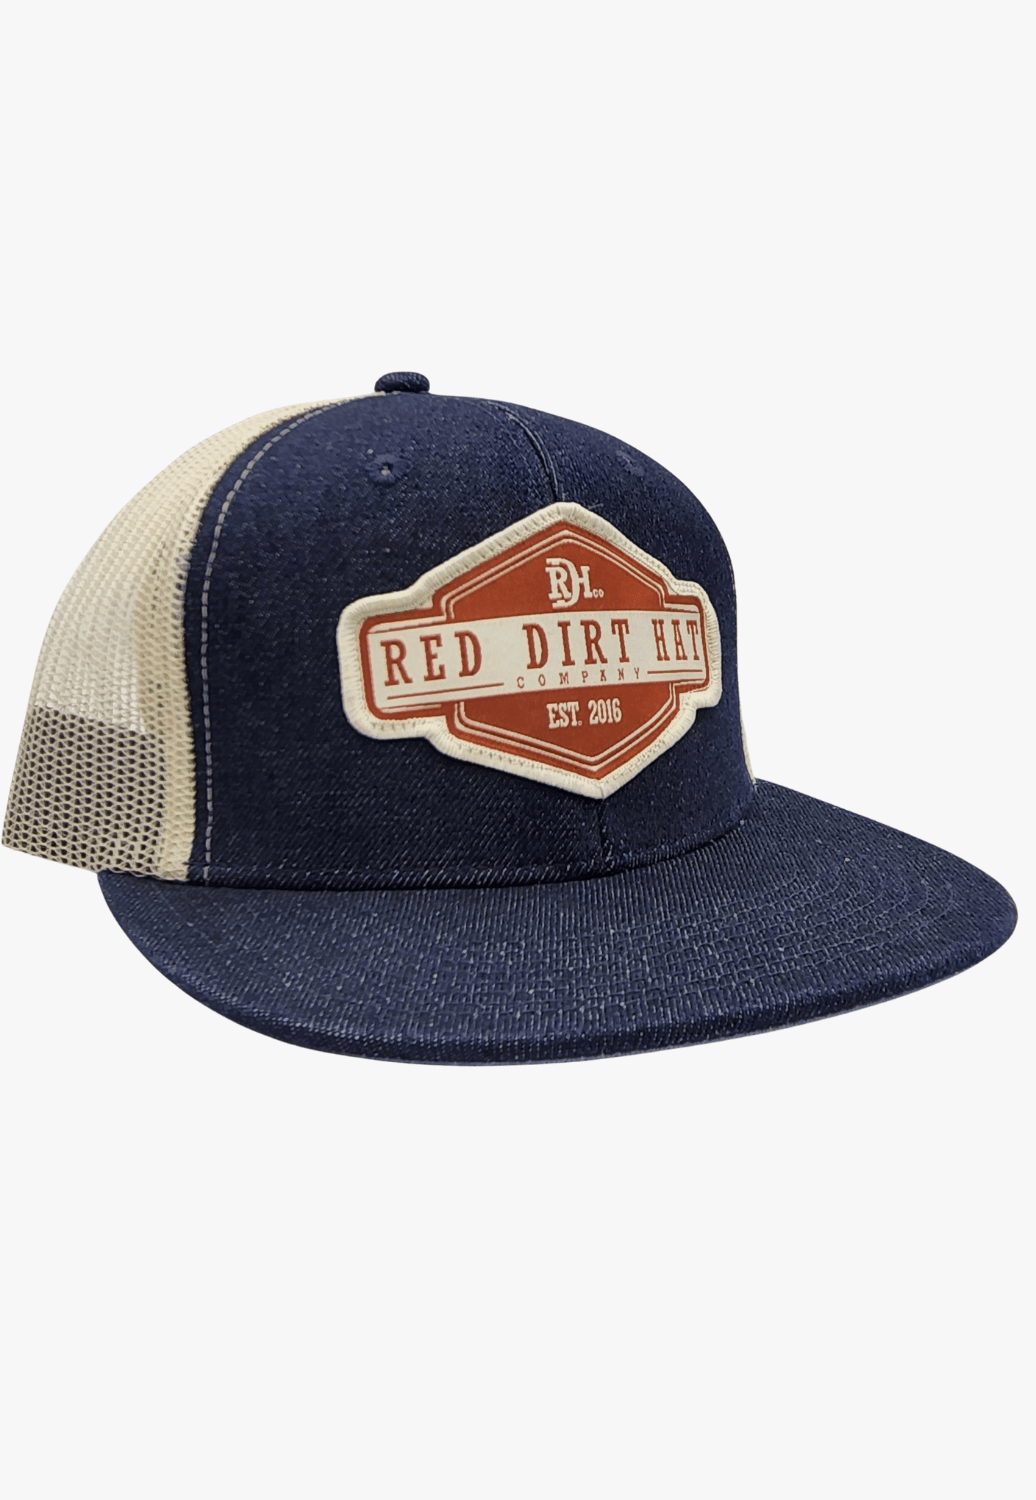 Red Dirt Hat Co. HATS - Caps Navy/Stone Red Dirt Hat Co. Rusted Buckle Cap